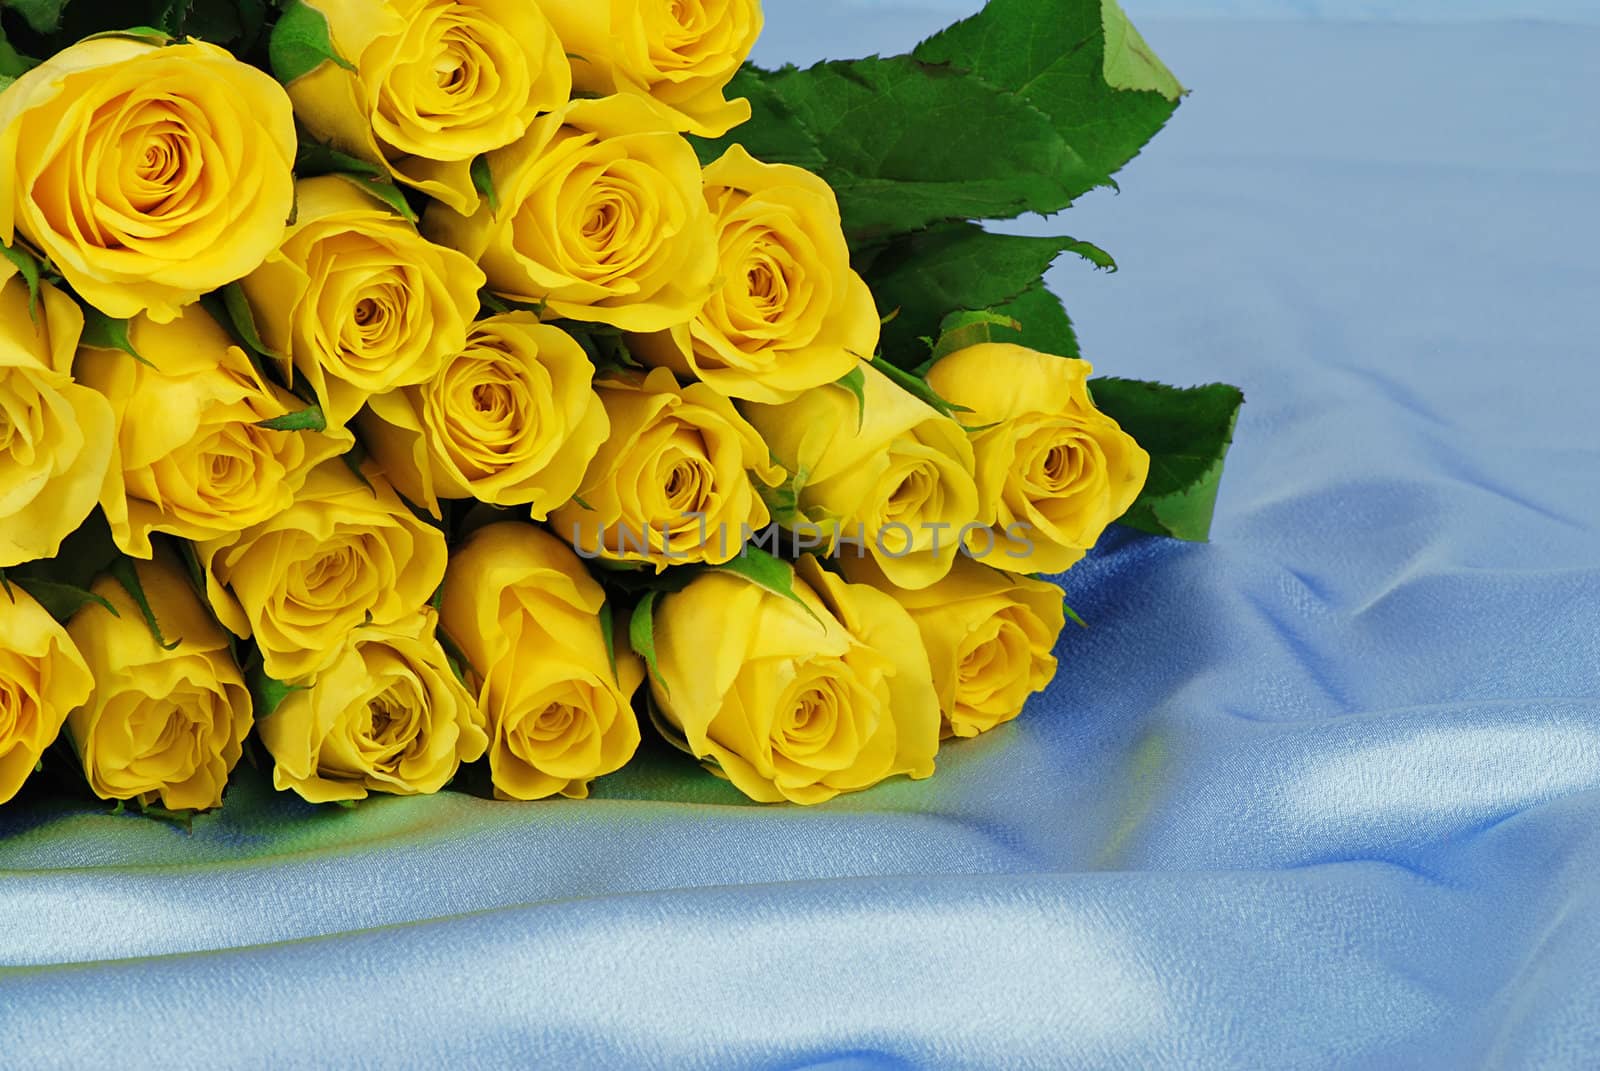 Beautiful yellow roses are laying on blue satin - symbol of anniversary